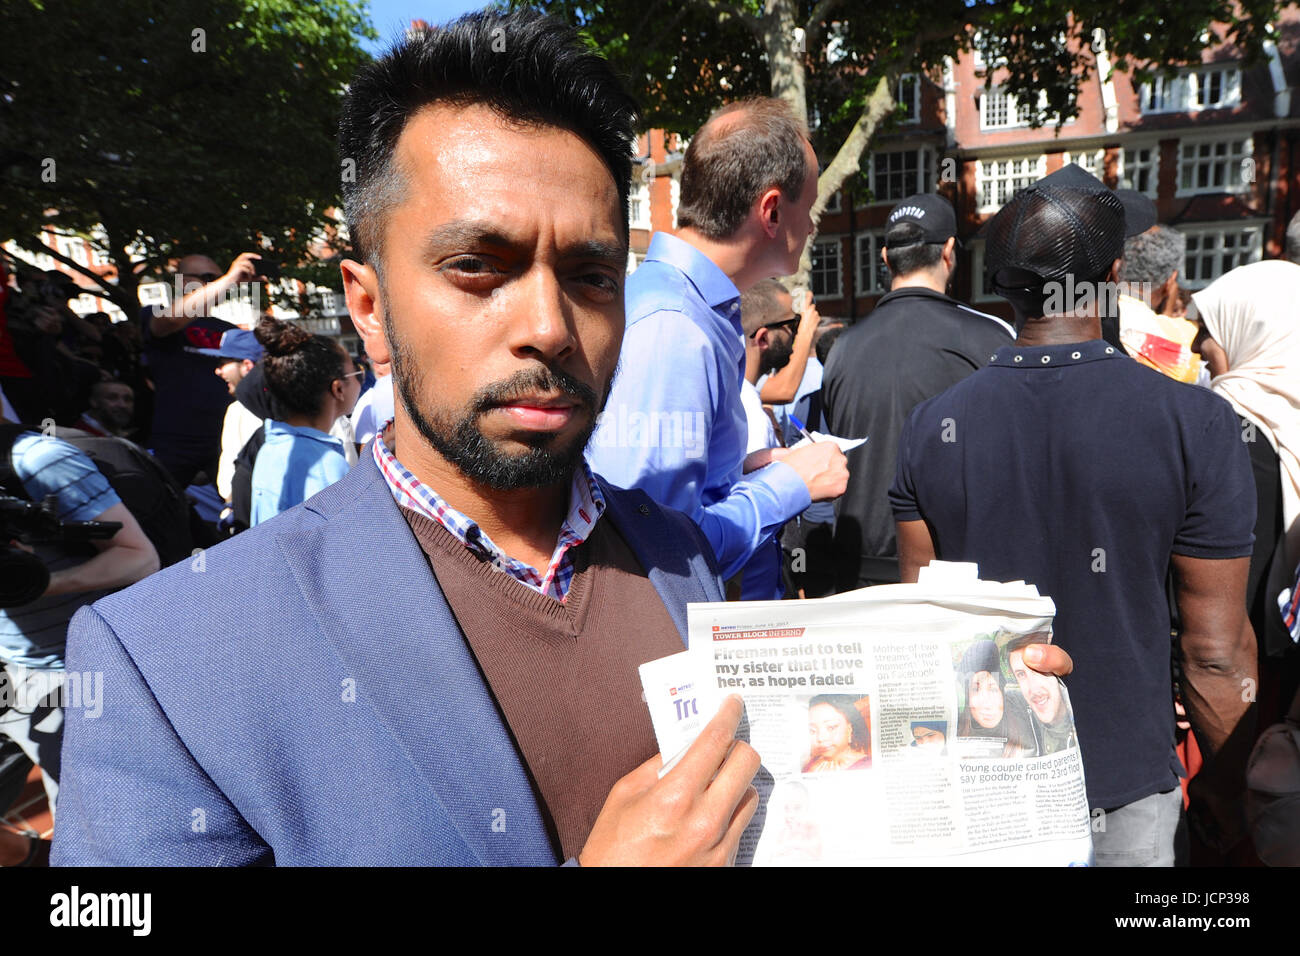 London, UK. 16th June, 2017. Mustafa al-Mansur, protest organiser and one of the people searching for friends who were caught up in the fire outside the offices of Kensington & Chelsea Council. Mr al-Mansur is holding a copy of Metro showing the picture of his friend Rania Ibrham who was caught in the fire with her two children and is still missing. Credit: Michael Preston/Alamy Live News Stock Photo